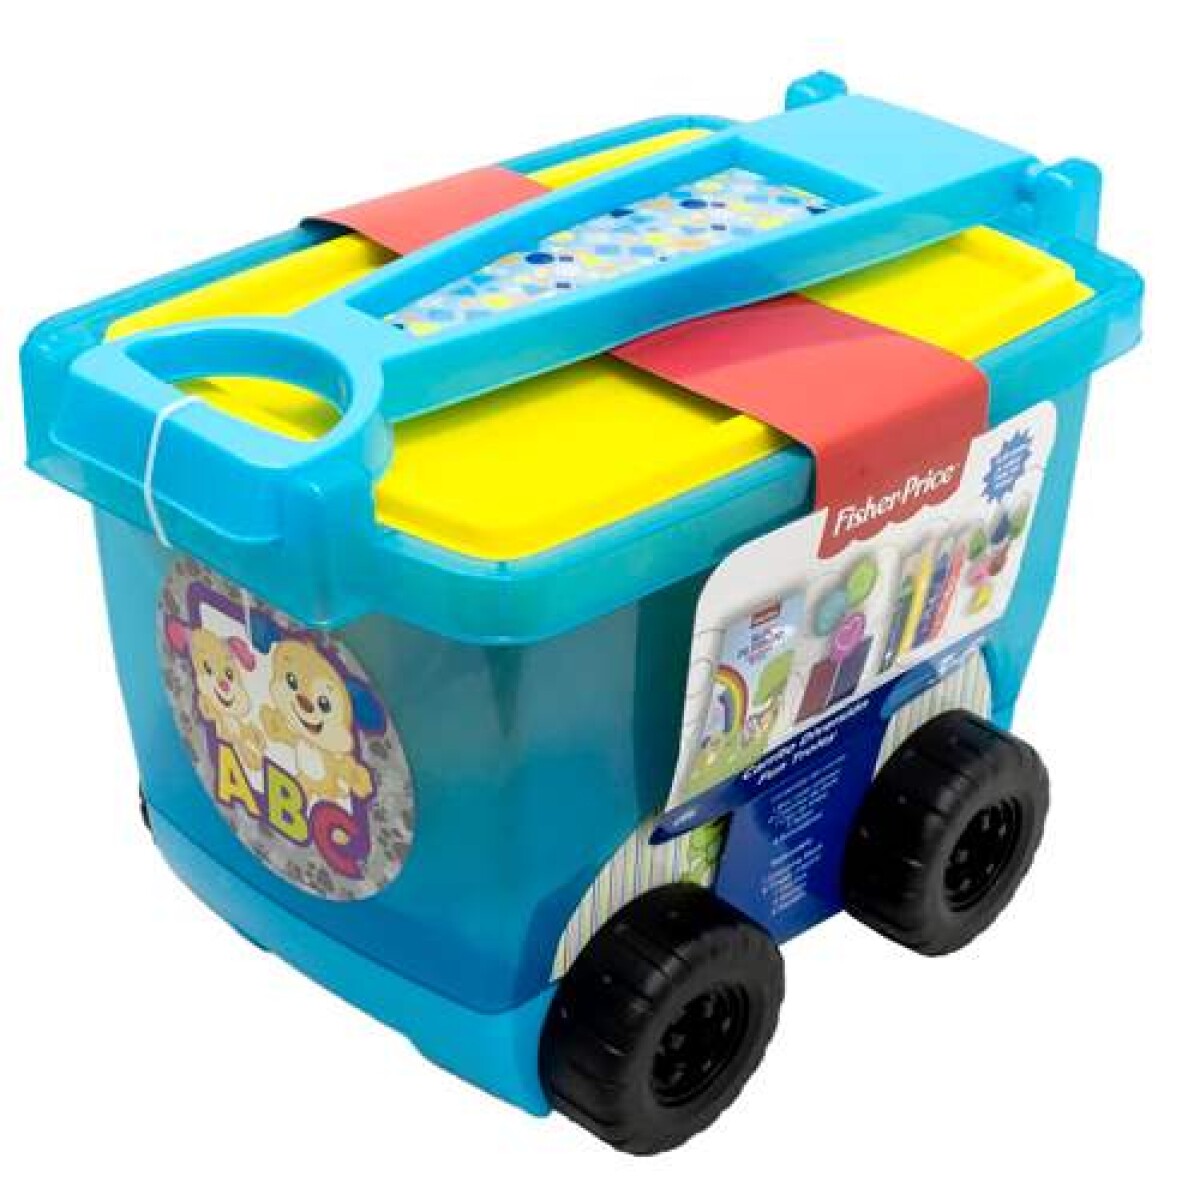 Fisher Price Camion Divertido 32x23x20cm 